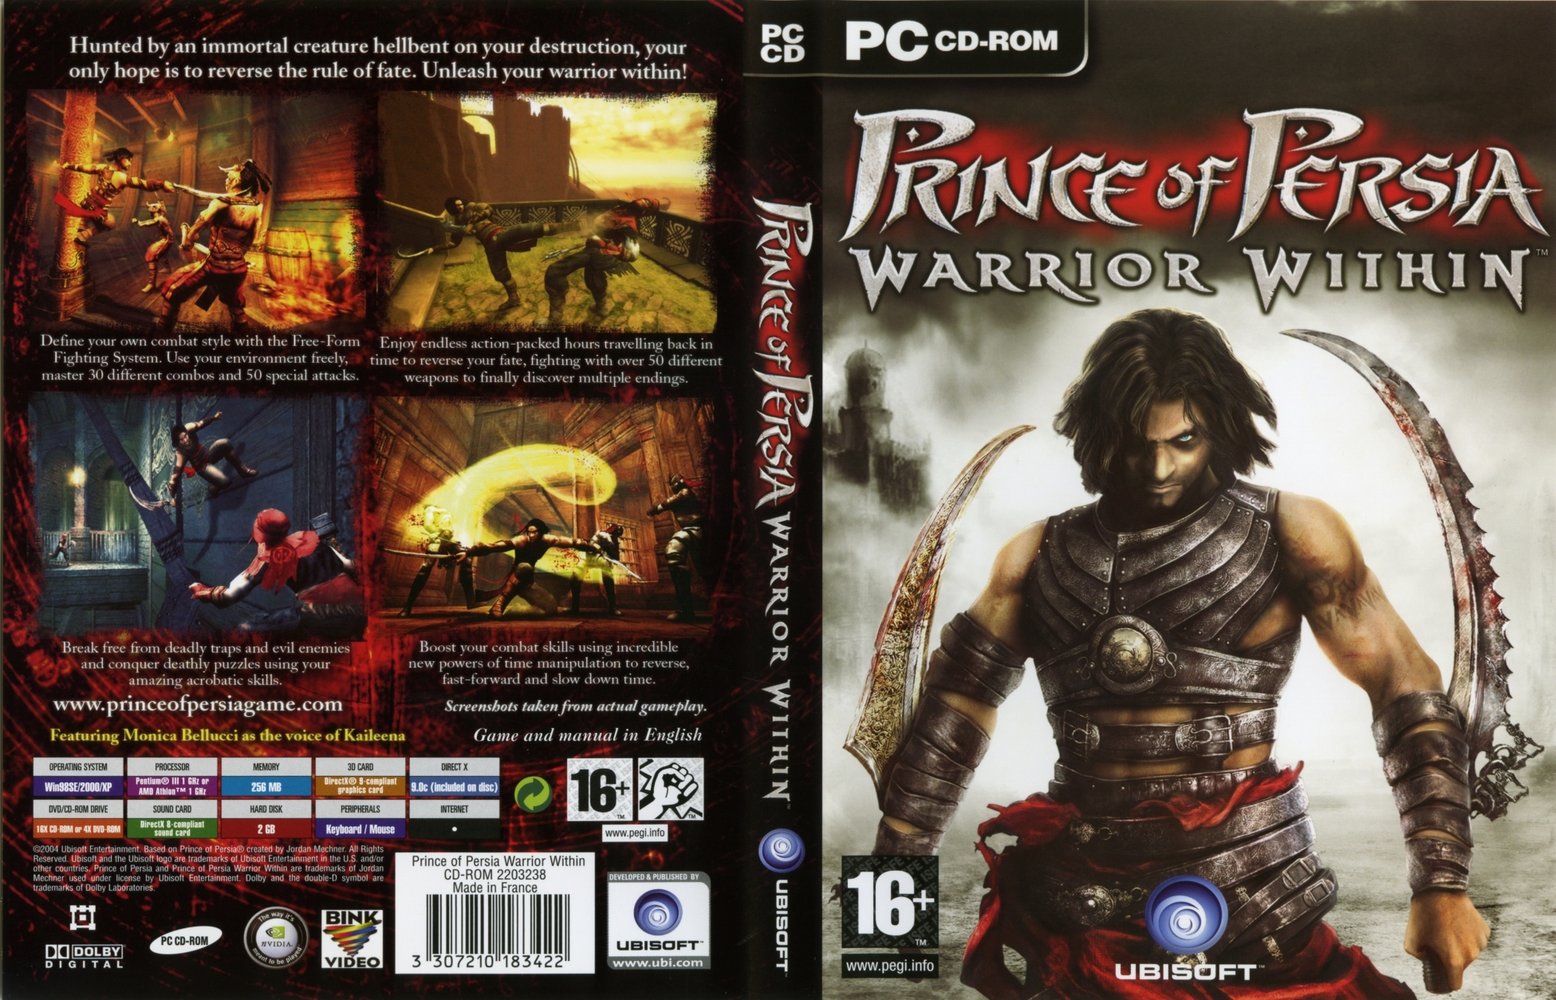 Download Prince Of Persia 2 - Warrior Within.RIP / PC / 239MB